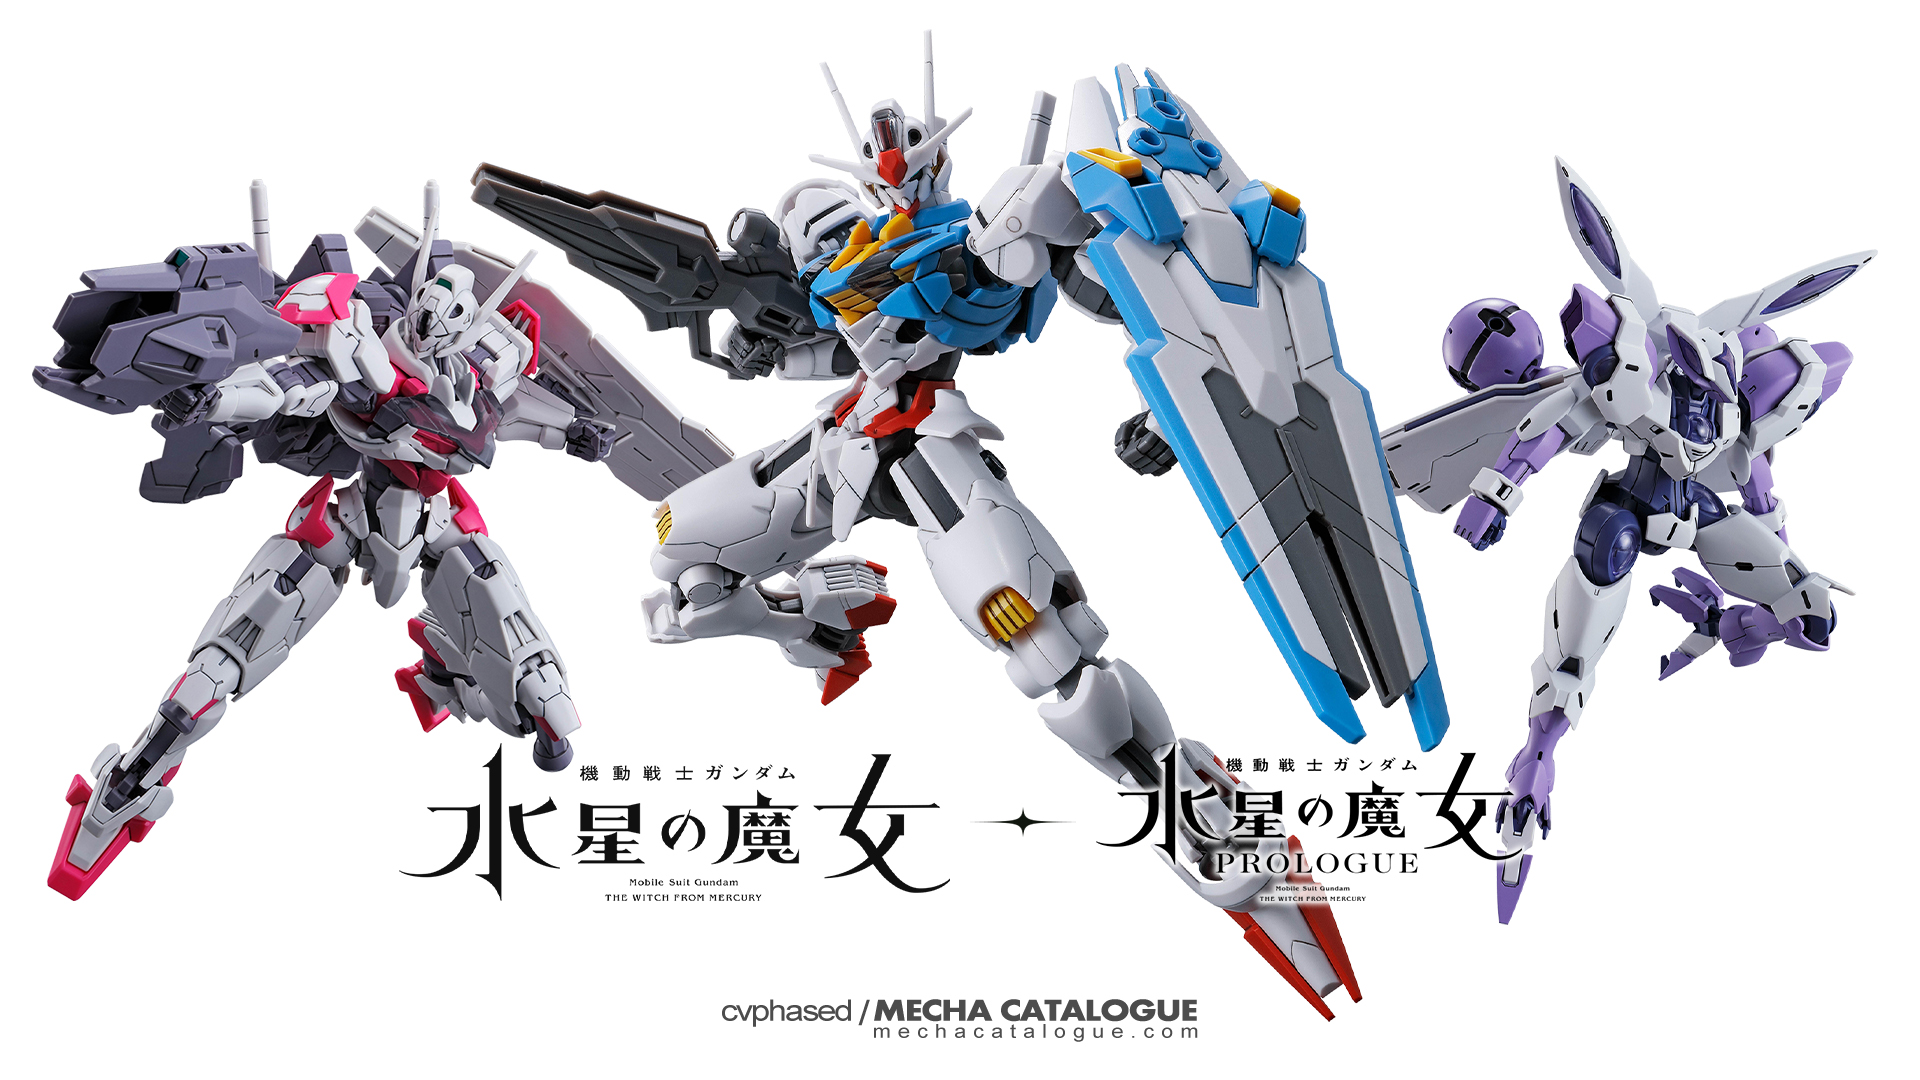 Let's Talk Gunpla and More, But Mostly Gunpla: “Mobile Suit Gundam THE  WITCH FROM MERCURY” #水星の魔女 #G_Witch – cvphased / MECHA CATALOGUE